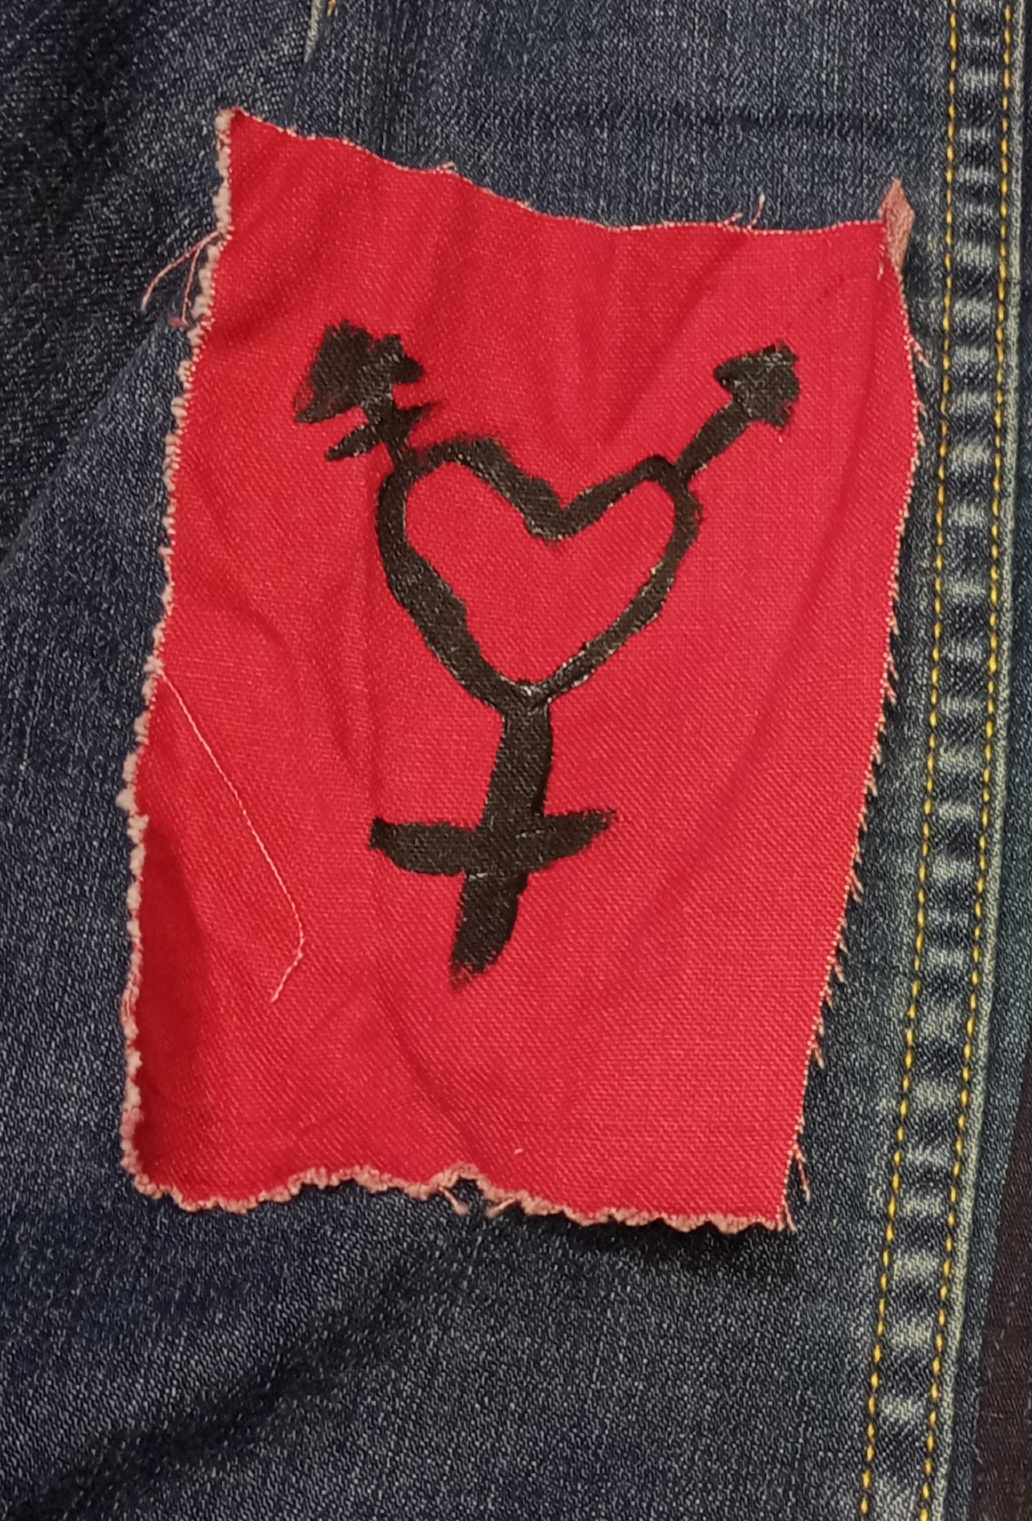 picture of a red canvas patch with a trans symbol on it. The circle of the symbol has been remplaced with a heart.